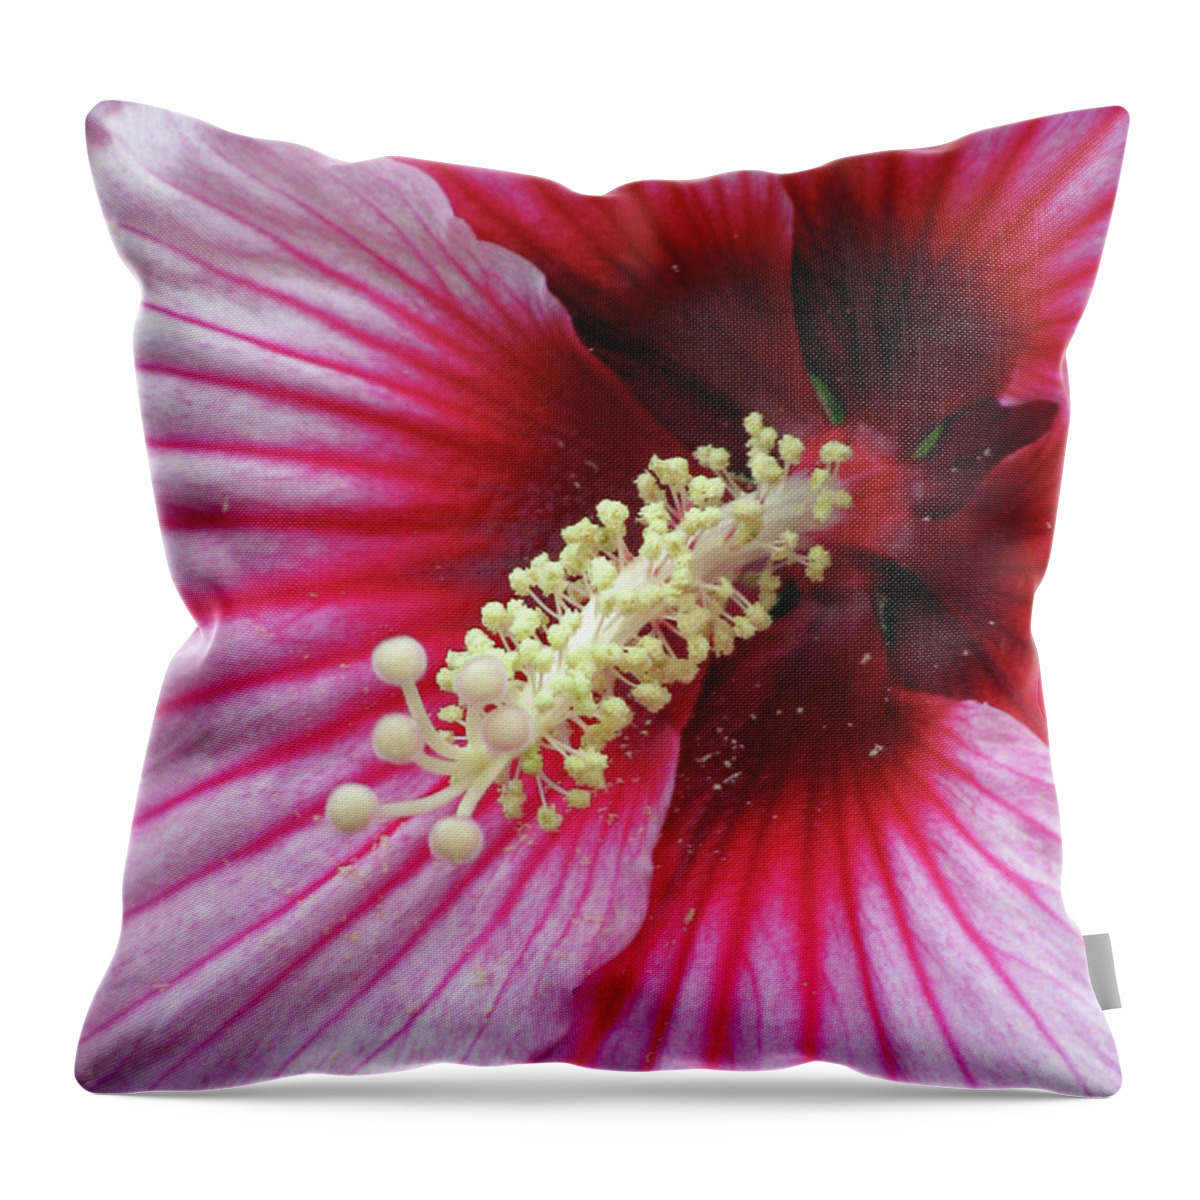 Hibiscus Throw Pillow featuring the photograph Hibiscus - Summerific Summer Storm 08 by Pamela Critchlow